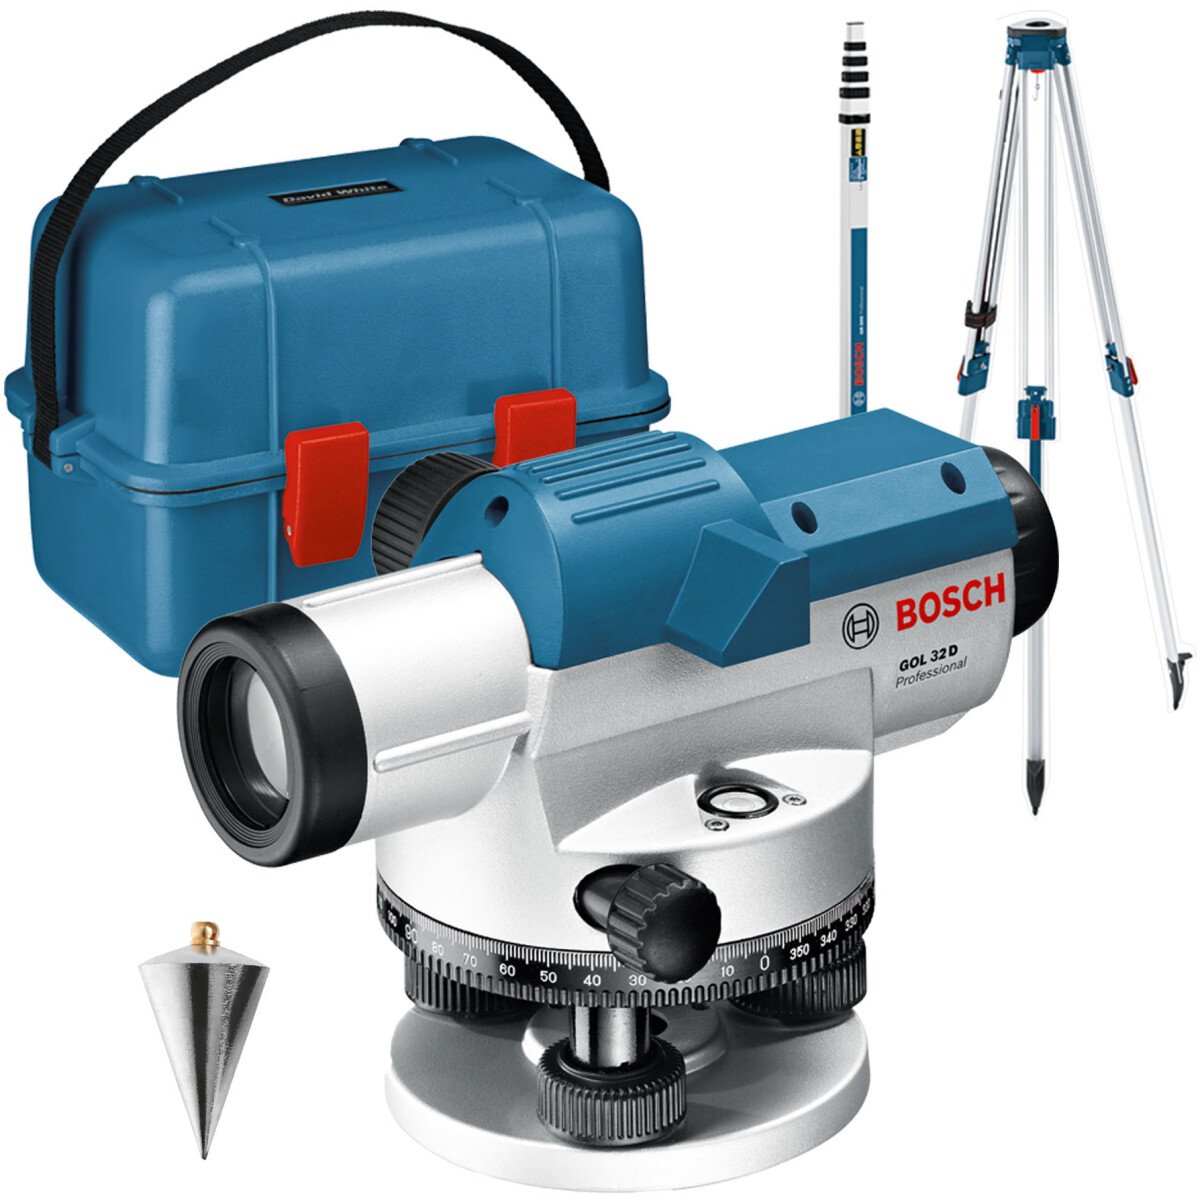 Bosch GOL32D SET Professional Optical Level 32x Magnification with Tripod and Measuring Rod